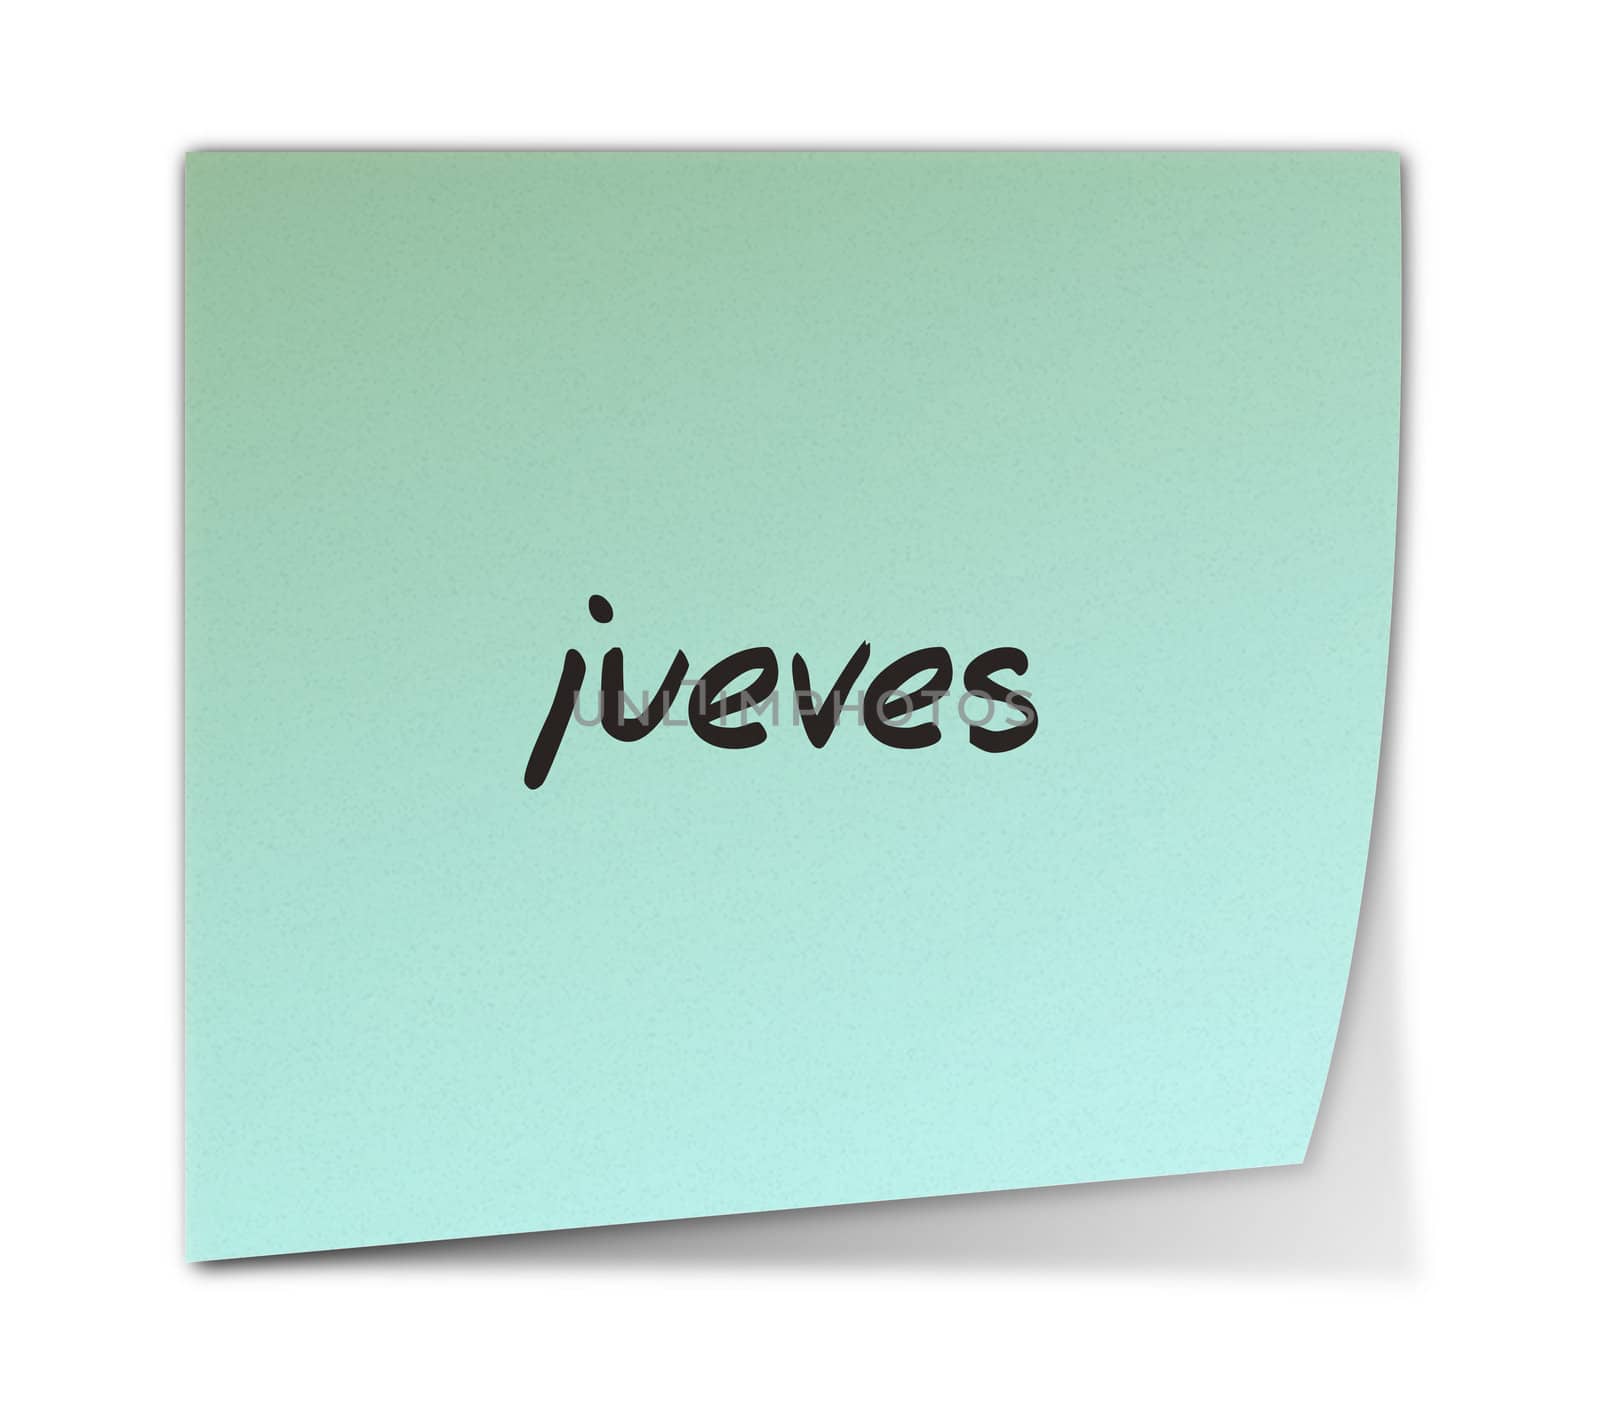 Color Paper Note With Wednesday Text in Spanish (jpeg file has clipping path)